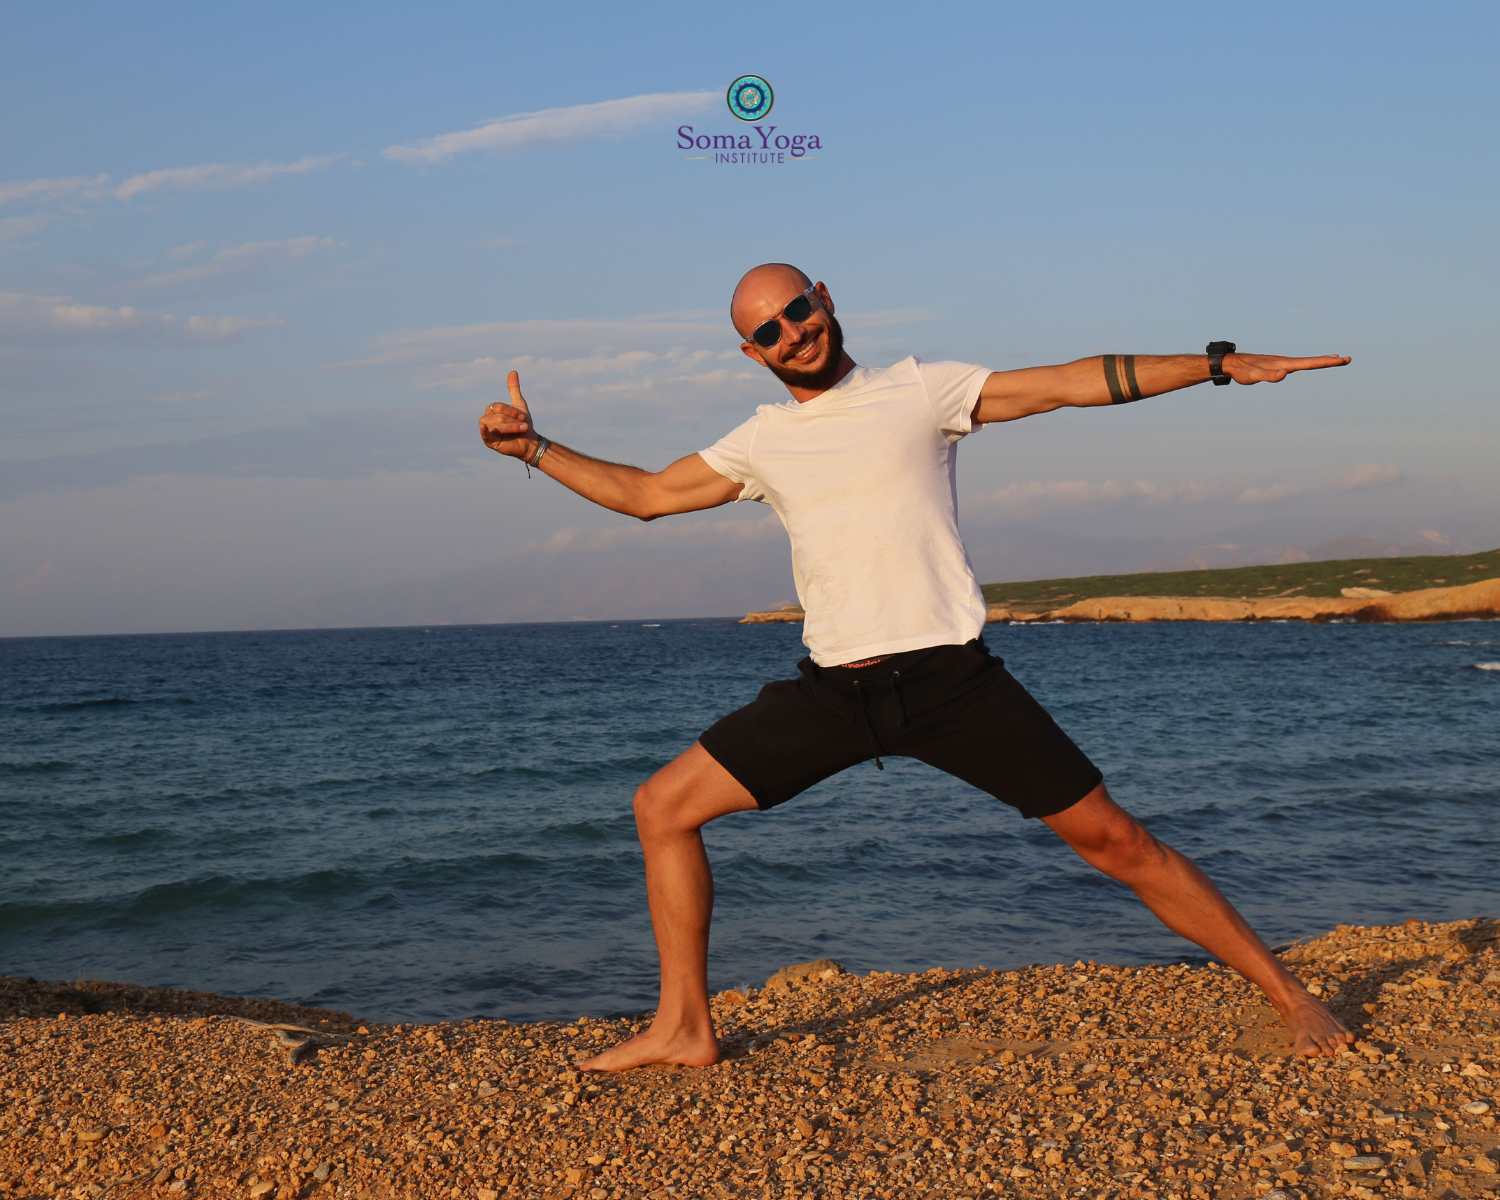 Journey to yoga retreats worldwide for the yoga lifestyle with Soma Yoga Insitute